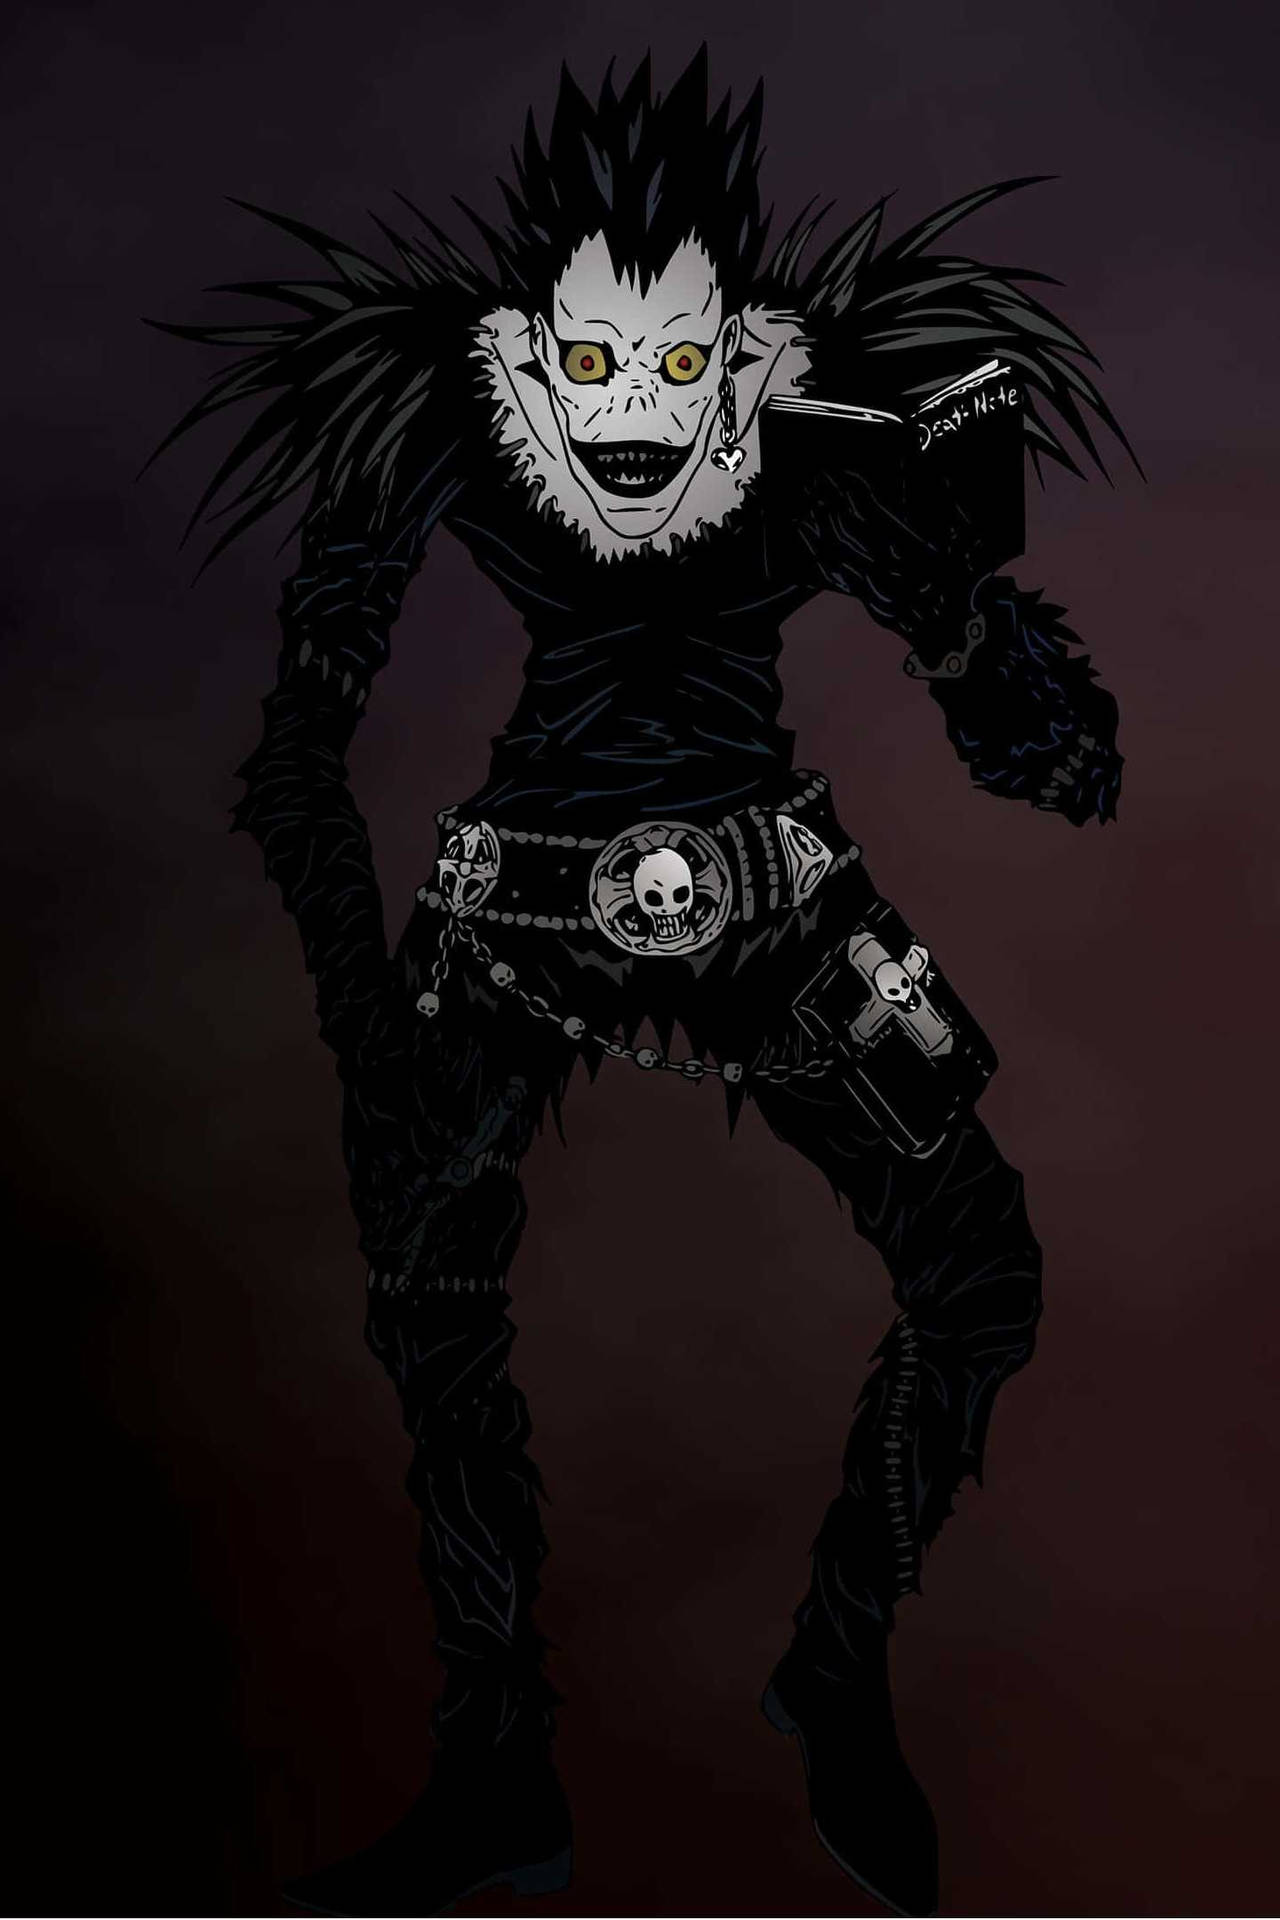 Goth-Like Ryuk From Death Note iPhone Wallpaper